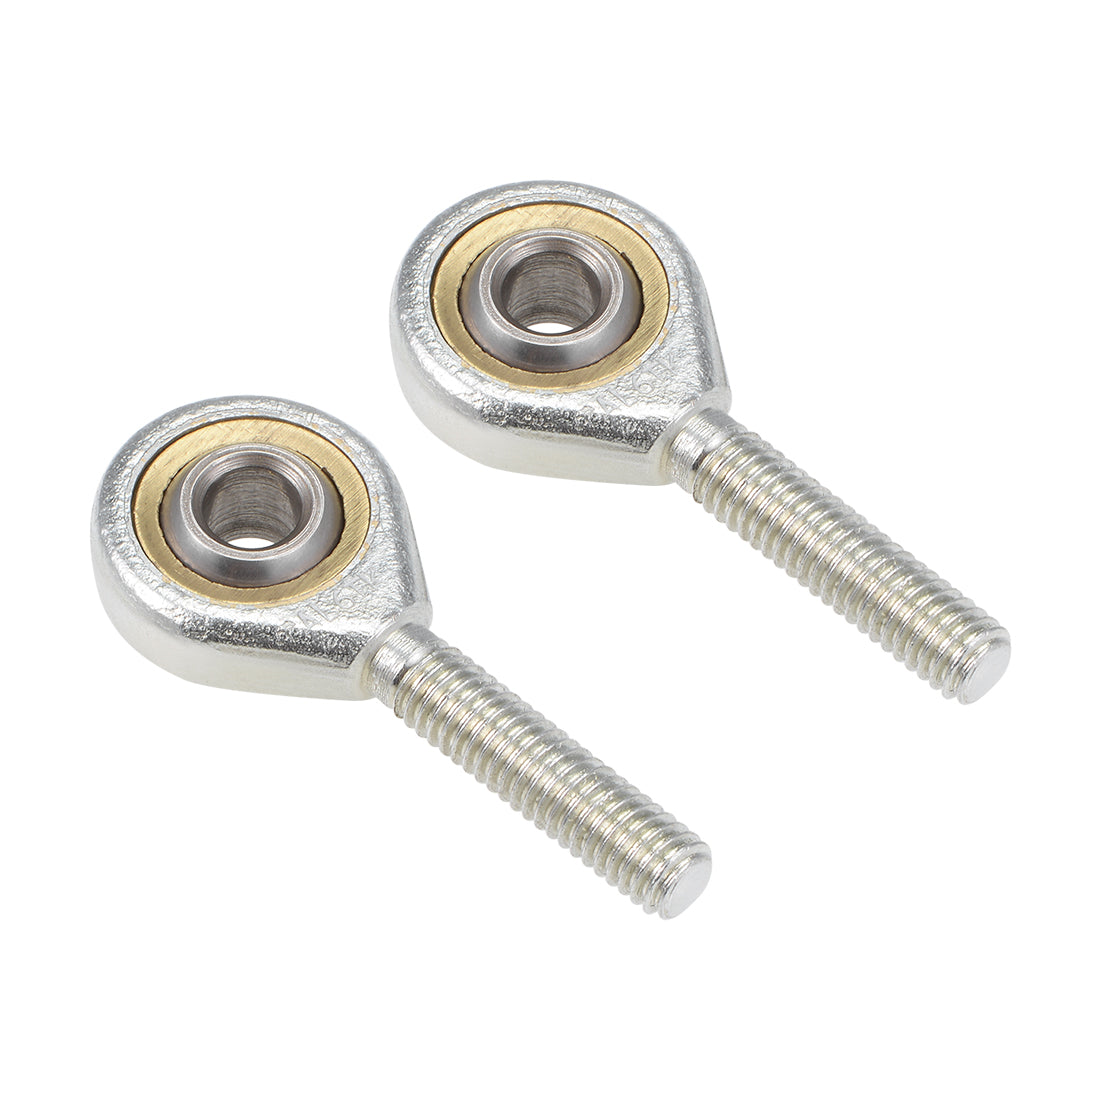 uxcell Uxcell 6mm Rod End Bearing M6x1.0mm Rod Ends Ball Joint Male Left Hand Thread 2pcs